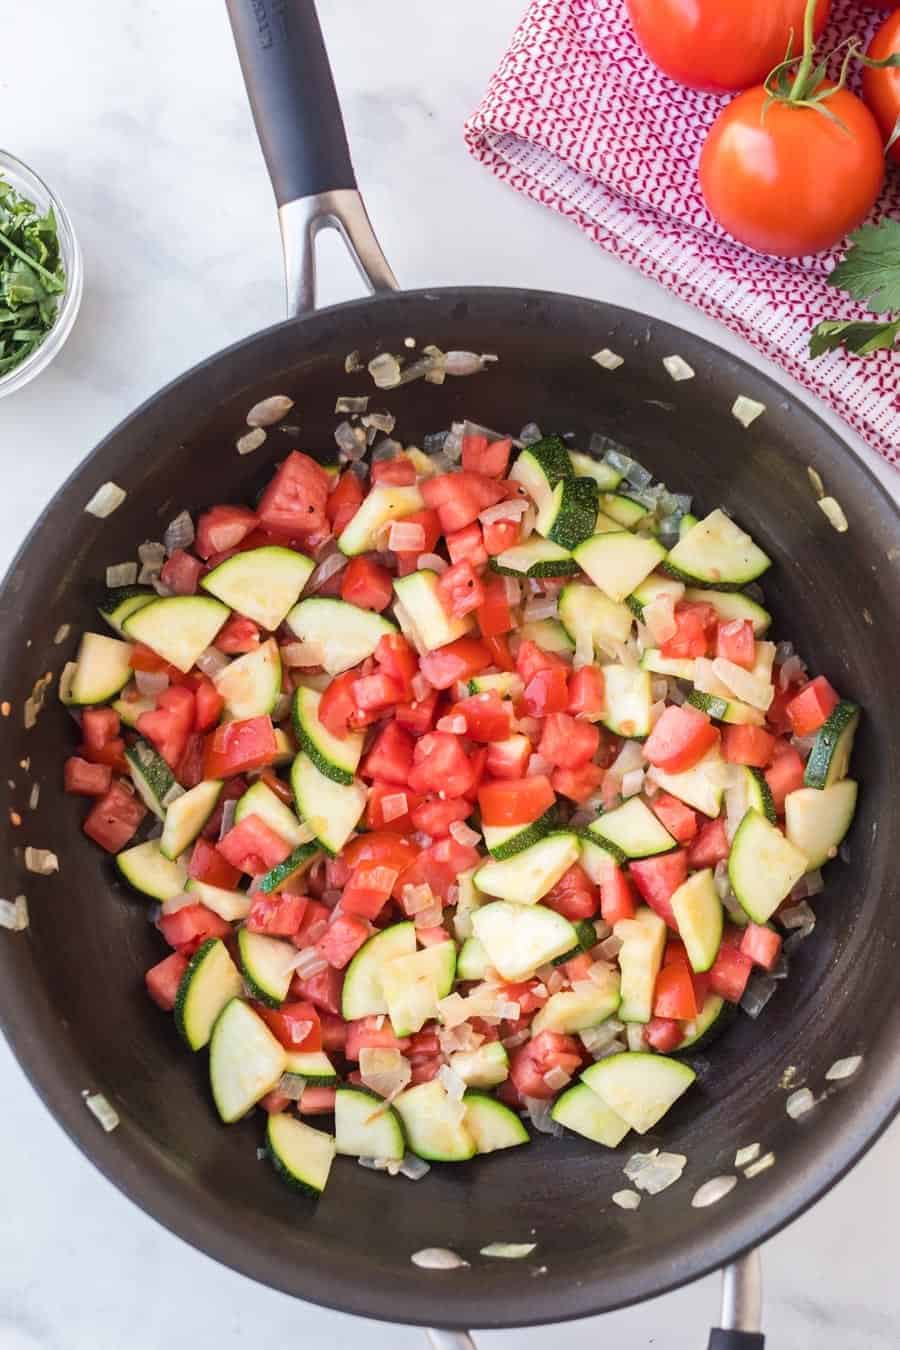 This zucchini side dish is full of onion, tomato, herbs, and of course zucchini to make a bright and fresh side that tastes out-of-this-world delicious! #zucchini #zucchiniside #easyzucchinirecipe #zucchinimedley